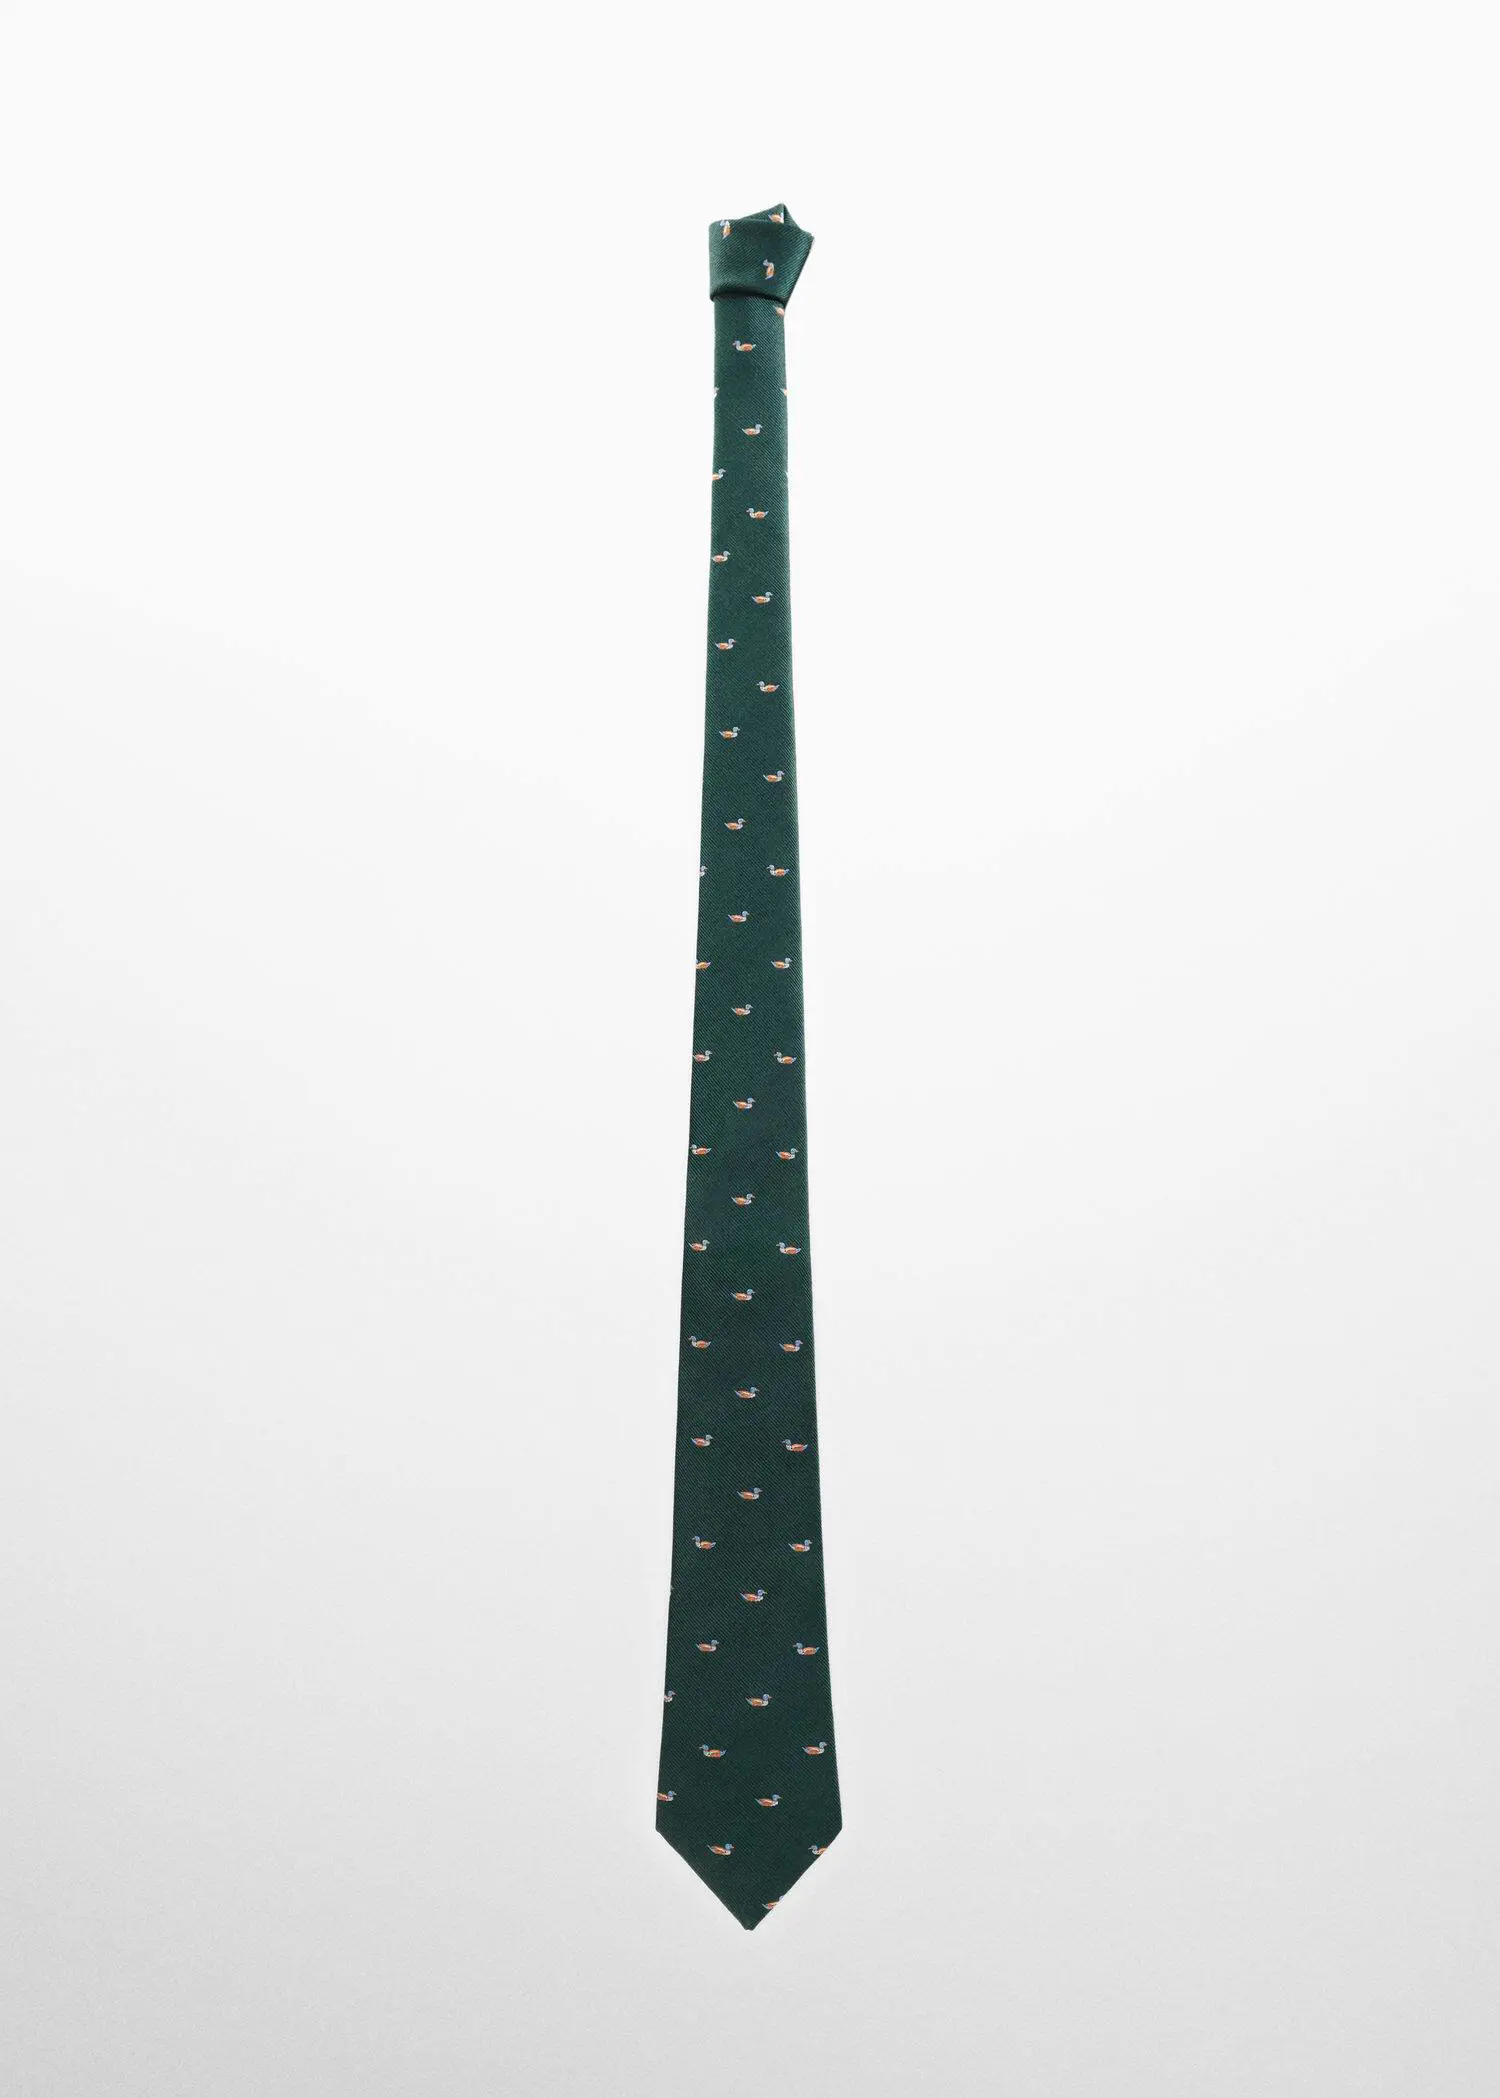 Mango Floral print tie. a green neck tie is shown on a white background. 